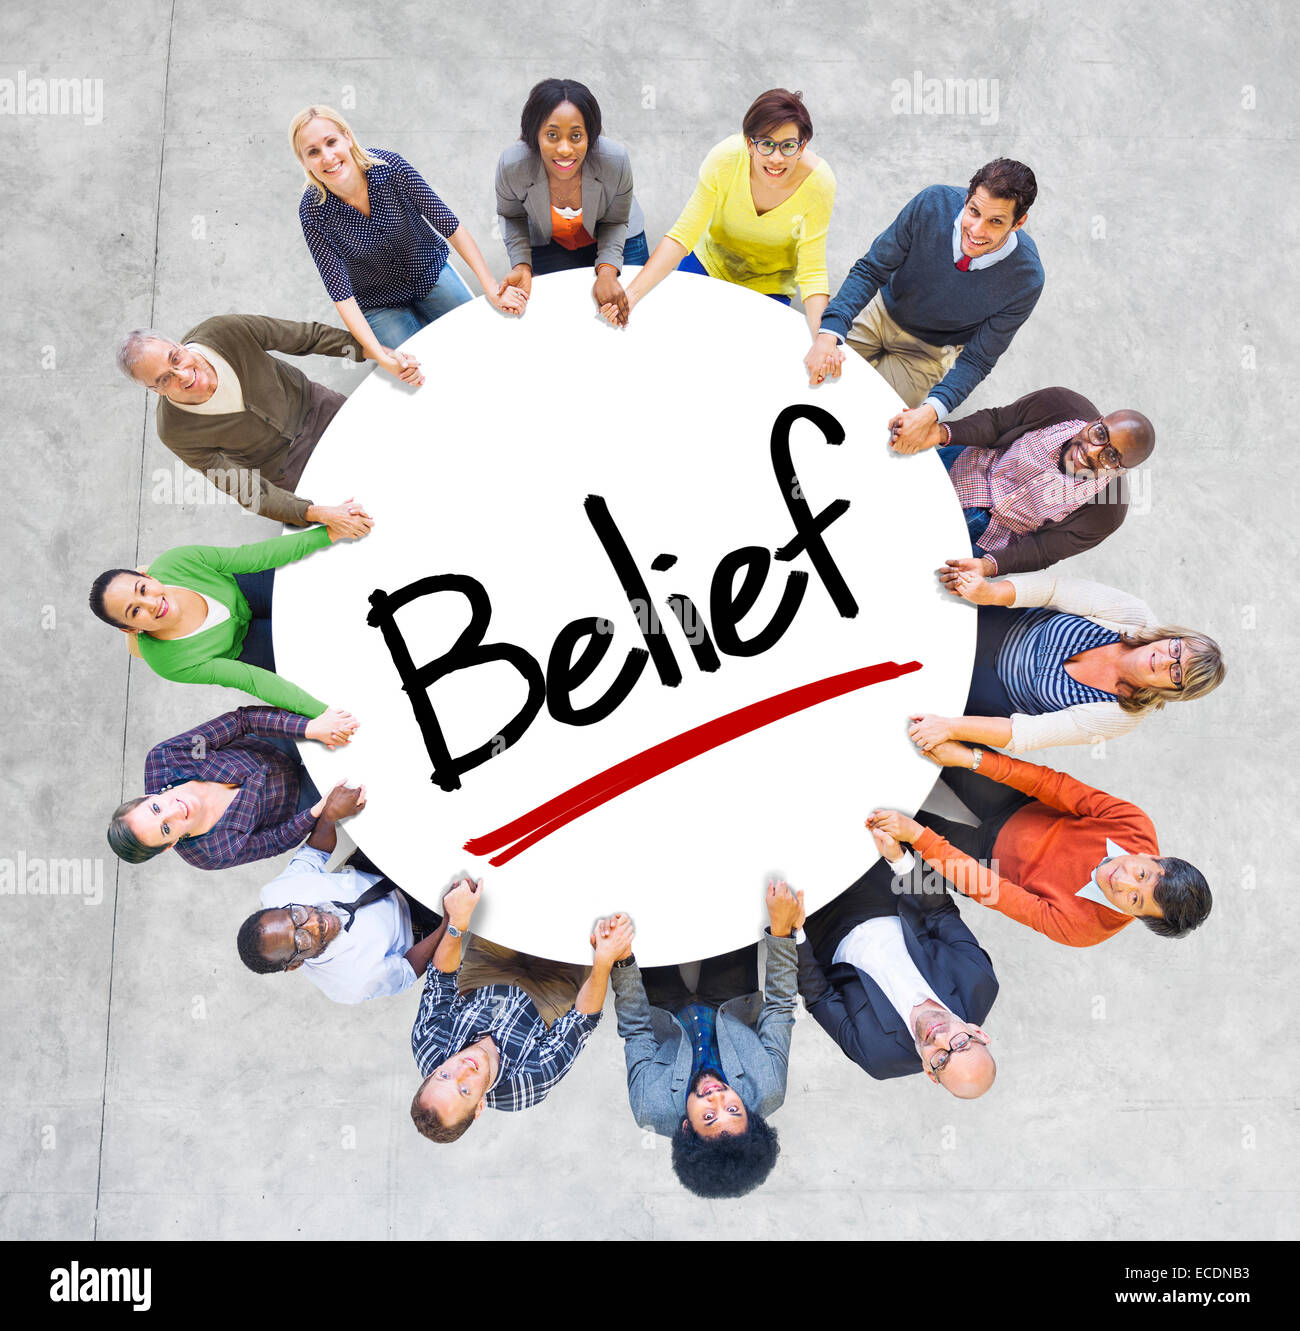 Multi-Ethnic Group of People and Belief Concepts Stock Photo